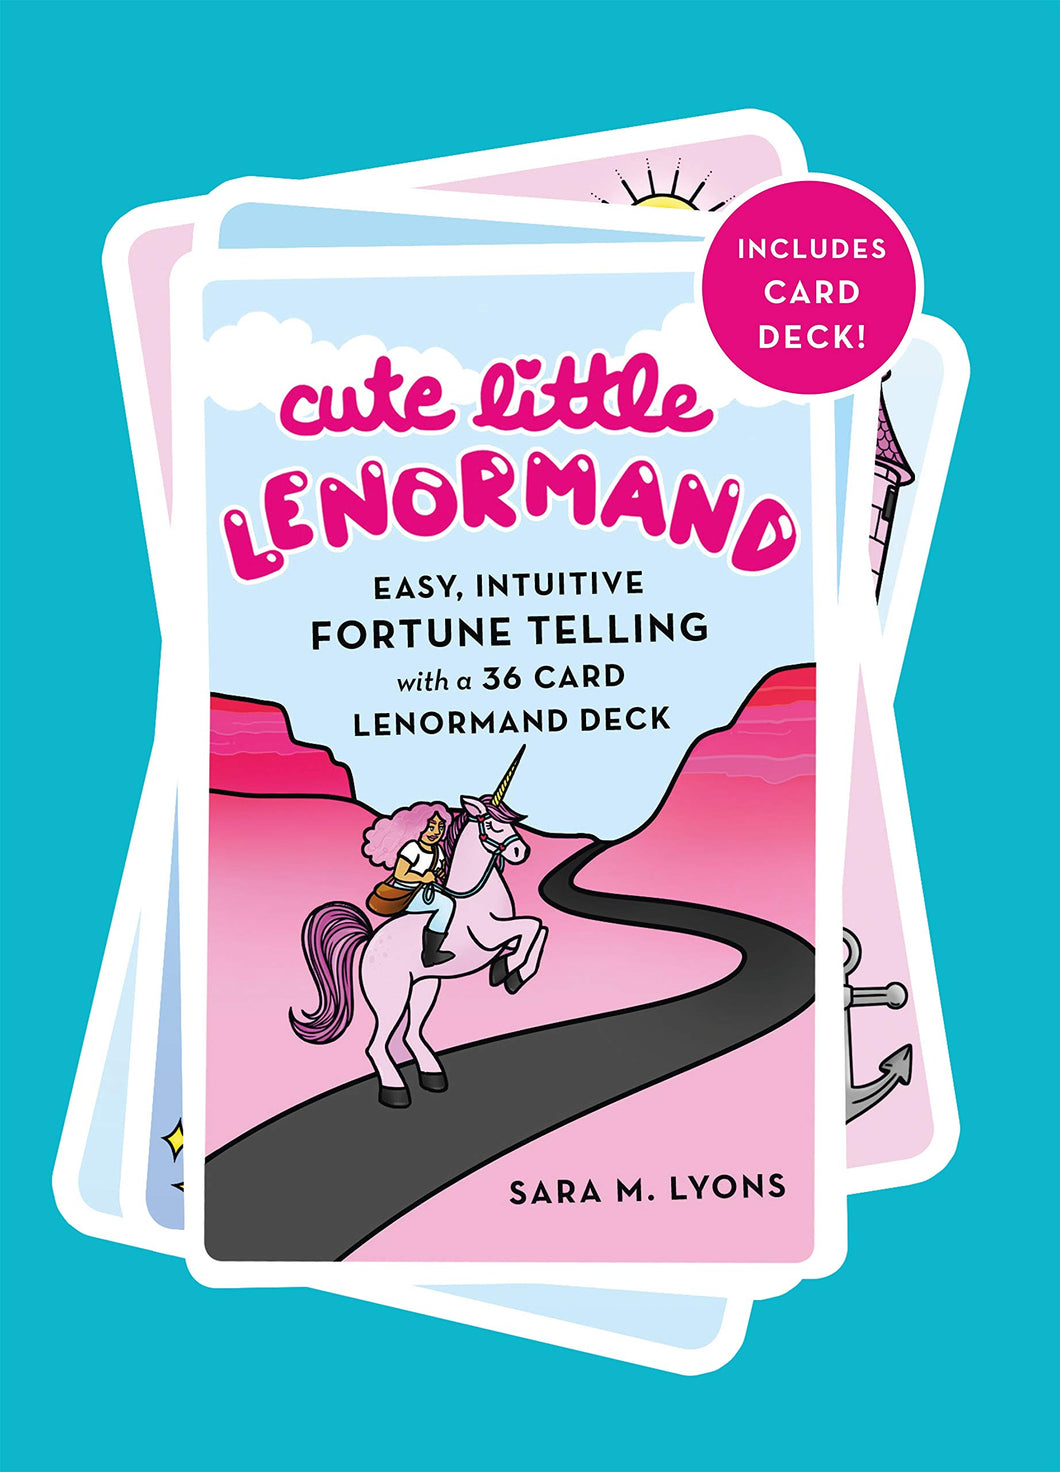 Cute Little Lenormand: Easy, Intuitive Fortune Telling with a 36 Card Lenormand Deck [Sara M. Lyons]